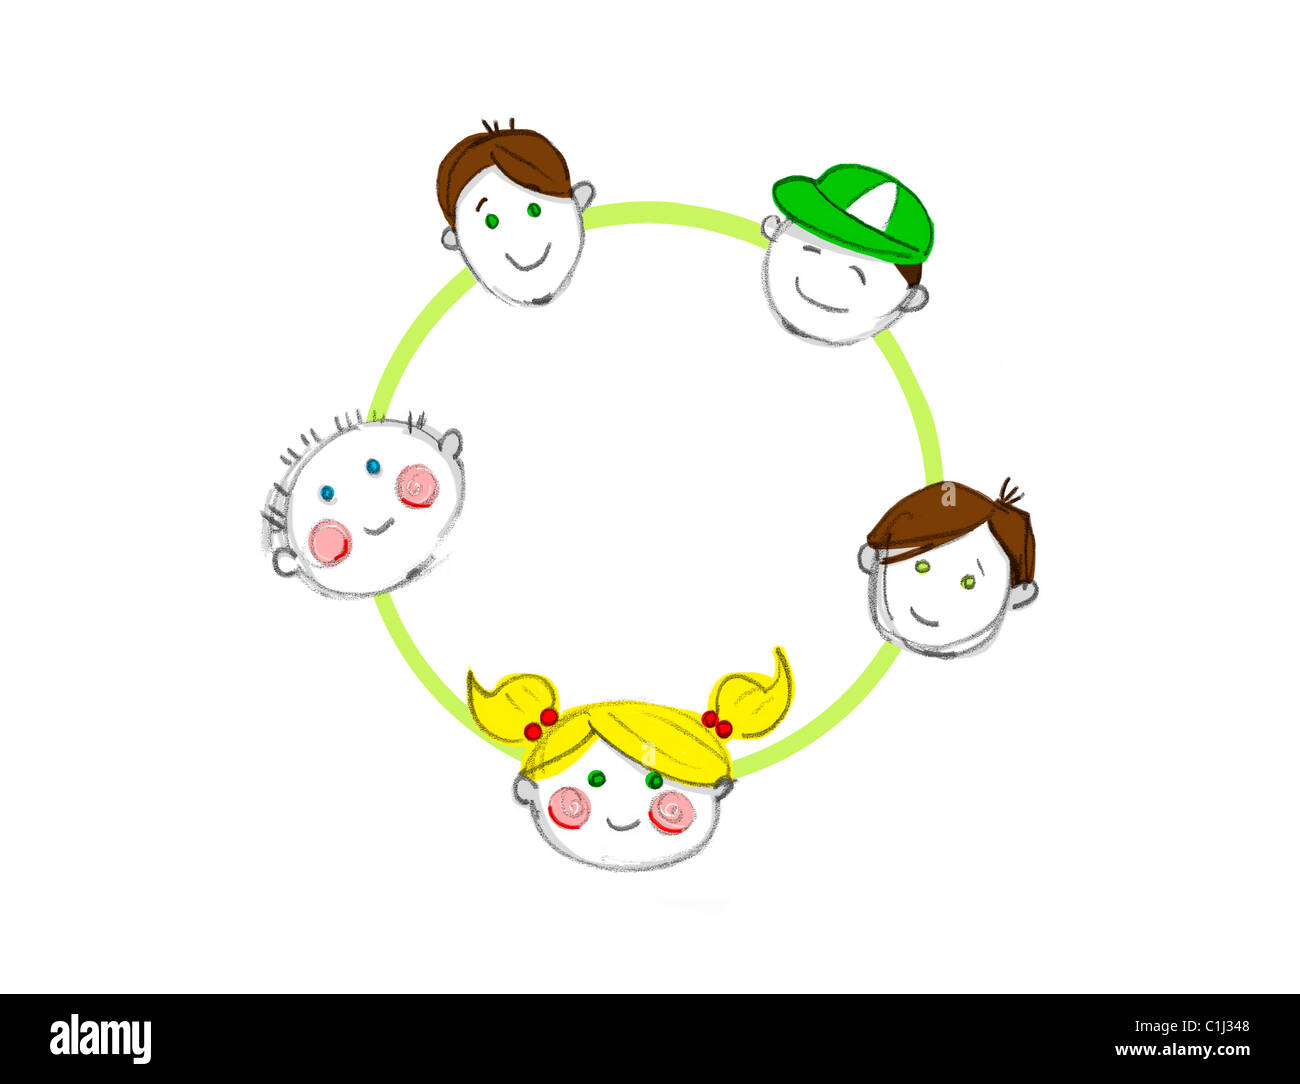 Illustration of Happy Children in a Circle Stock Photo